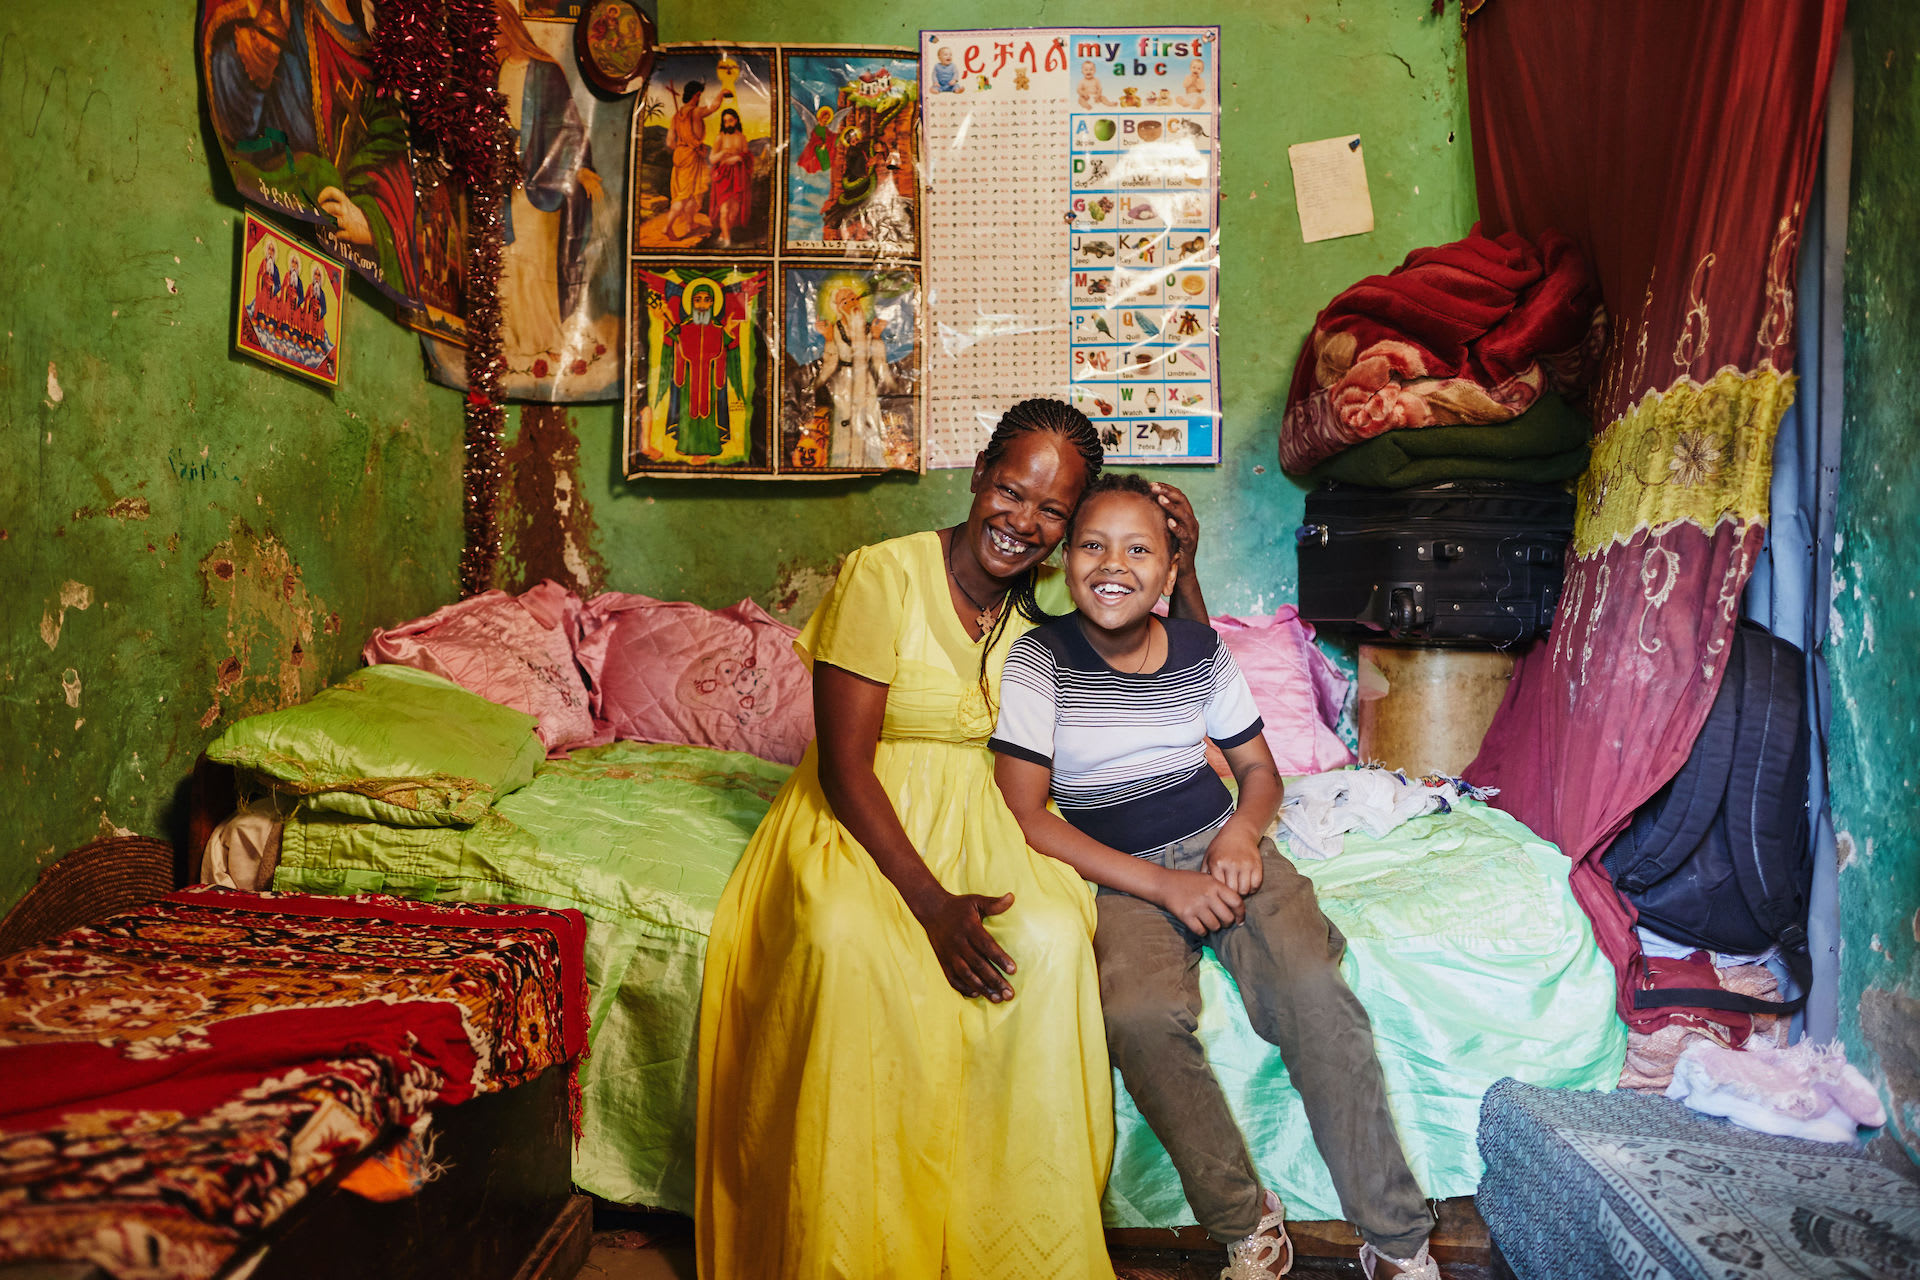 A mother and daughter sit on the bed and smile at the camera in their one-room home.